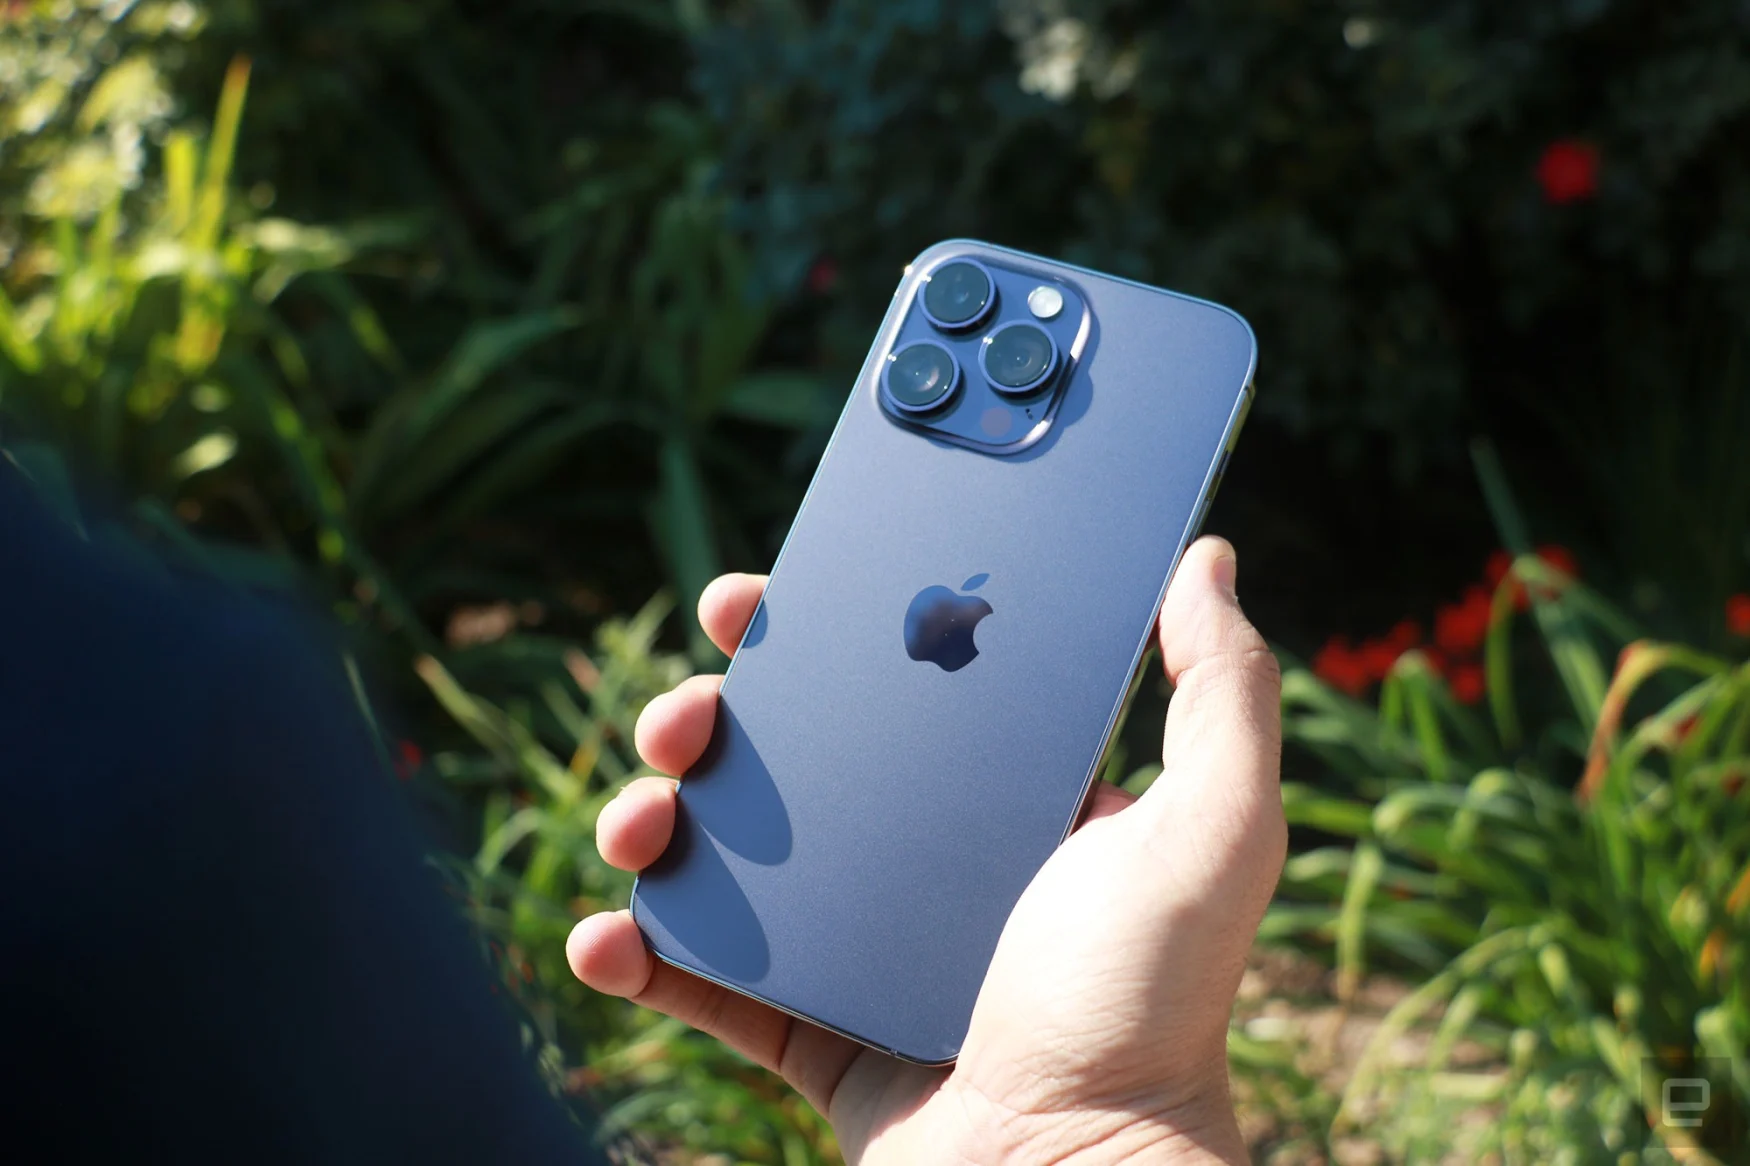 Review photography of the iPhone 14 Pro. It's in a person's right hand with the phone's back facing the camera. Western US Greenery blurred in the background behind.